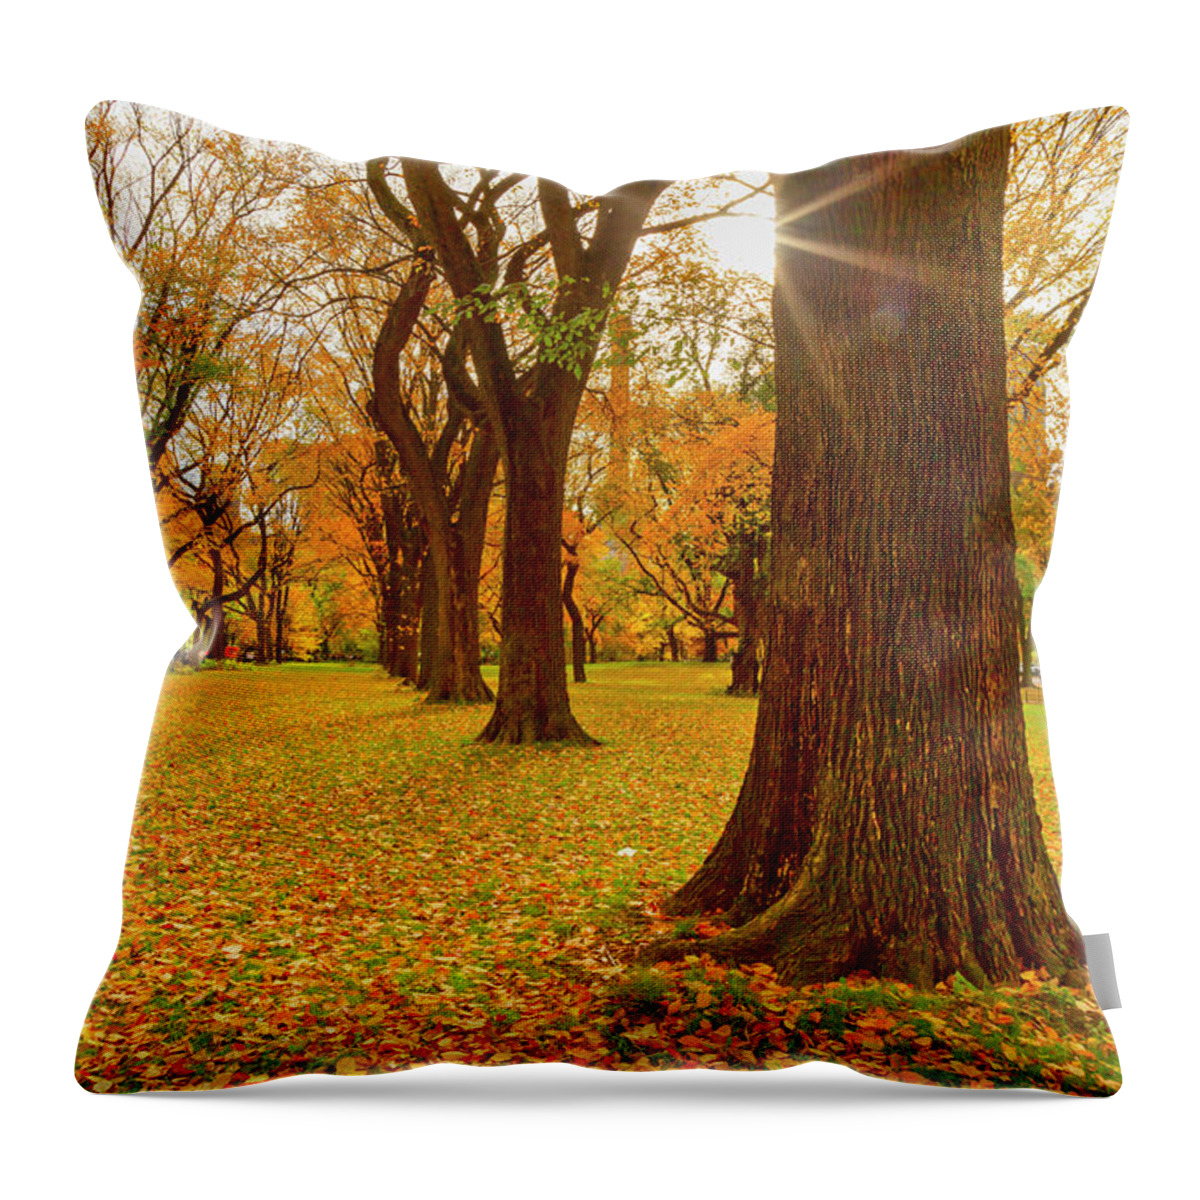 Estock Throw Pillow featuring the digital art Autumn In Central Park, Nyc by Claudia Uripos